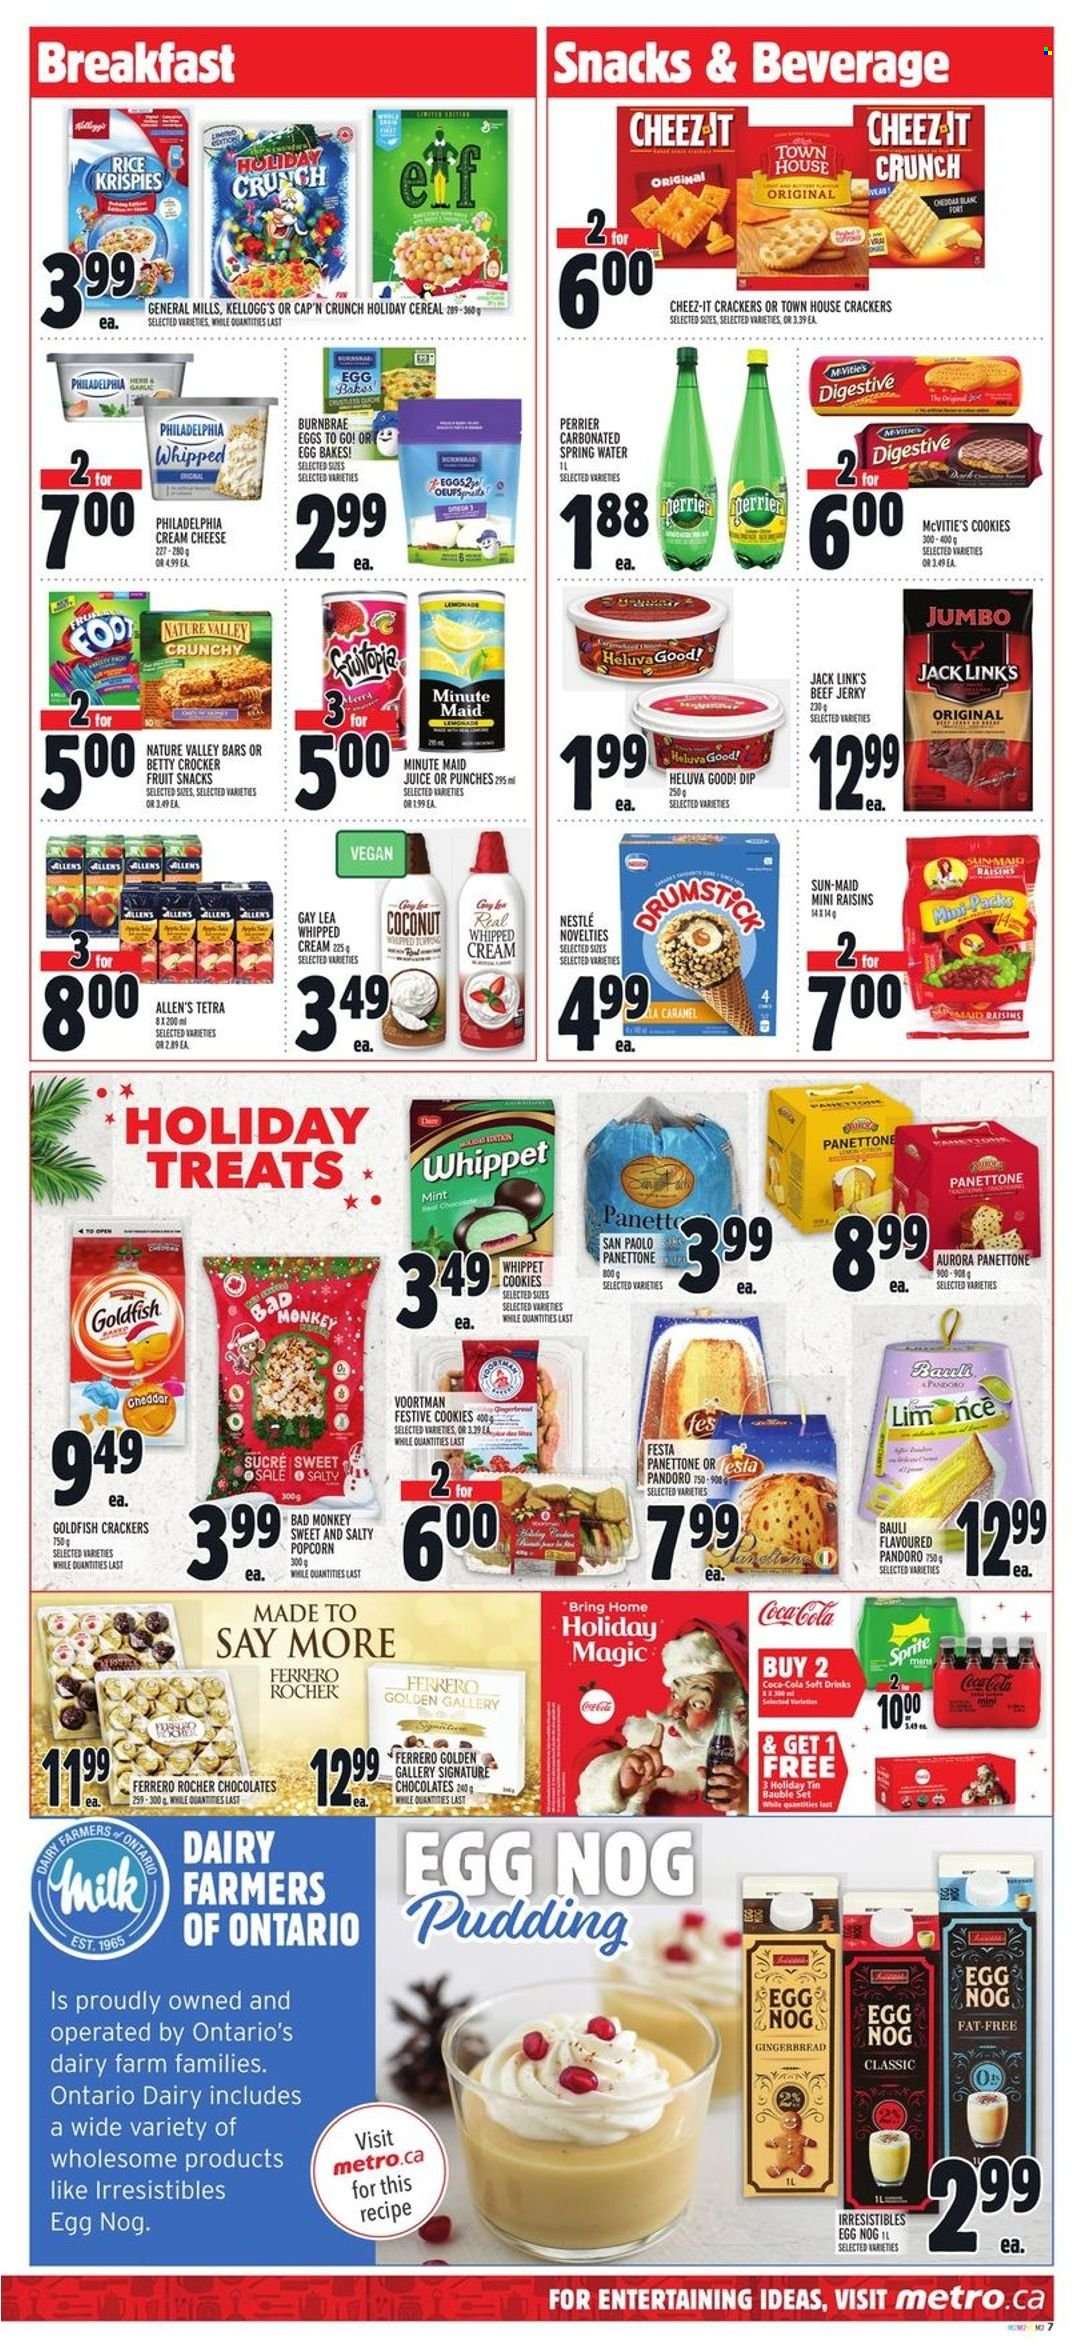 thumbnail - Metro Flyer - December 02, 2021 - December 08, 2021 - Sales products - gingerbread, panettone, coconut, beef jerky, jerky, cream cheese, cheese, pudding, whipped cream, cookies, chocolate, crackers, Kellogg's, Digestive, fruit snack, popcorn, Goldfish, Cheez-It, Jack Link's, cereals, Rice Krispies, Cap'n Crunch, Nature Valley, caramel, dried fruit, Coca-Cola, lemonade, Sprite, juice, soft drink, Perrier, fruit punch, spring water, bauble, Nestlé, raisins, Philadelphia, Ferrero Rocher. Page 8.